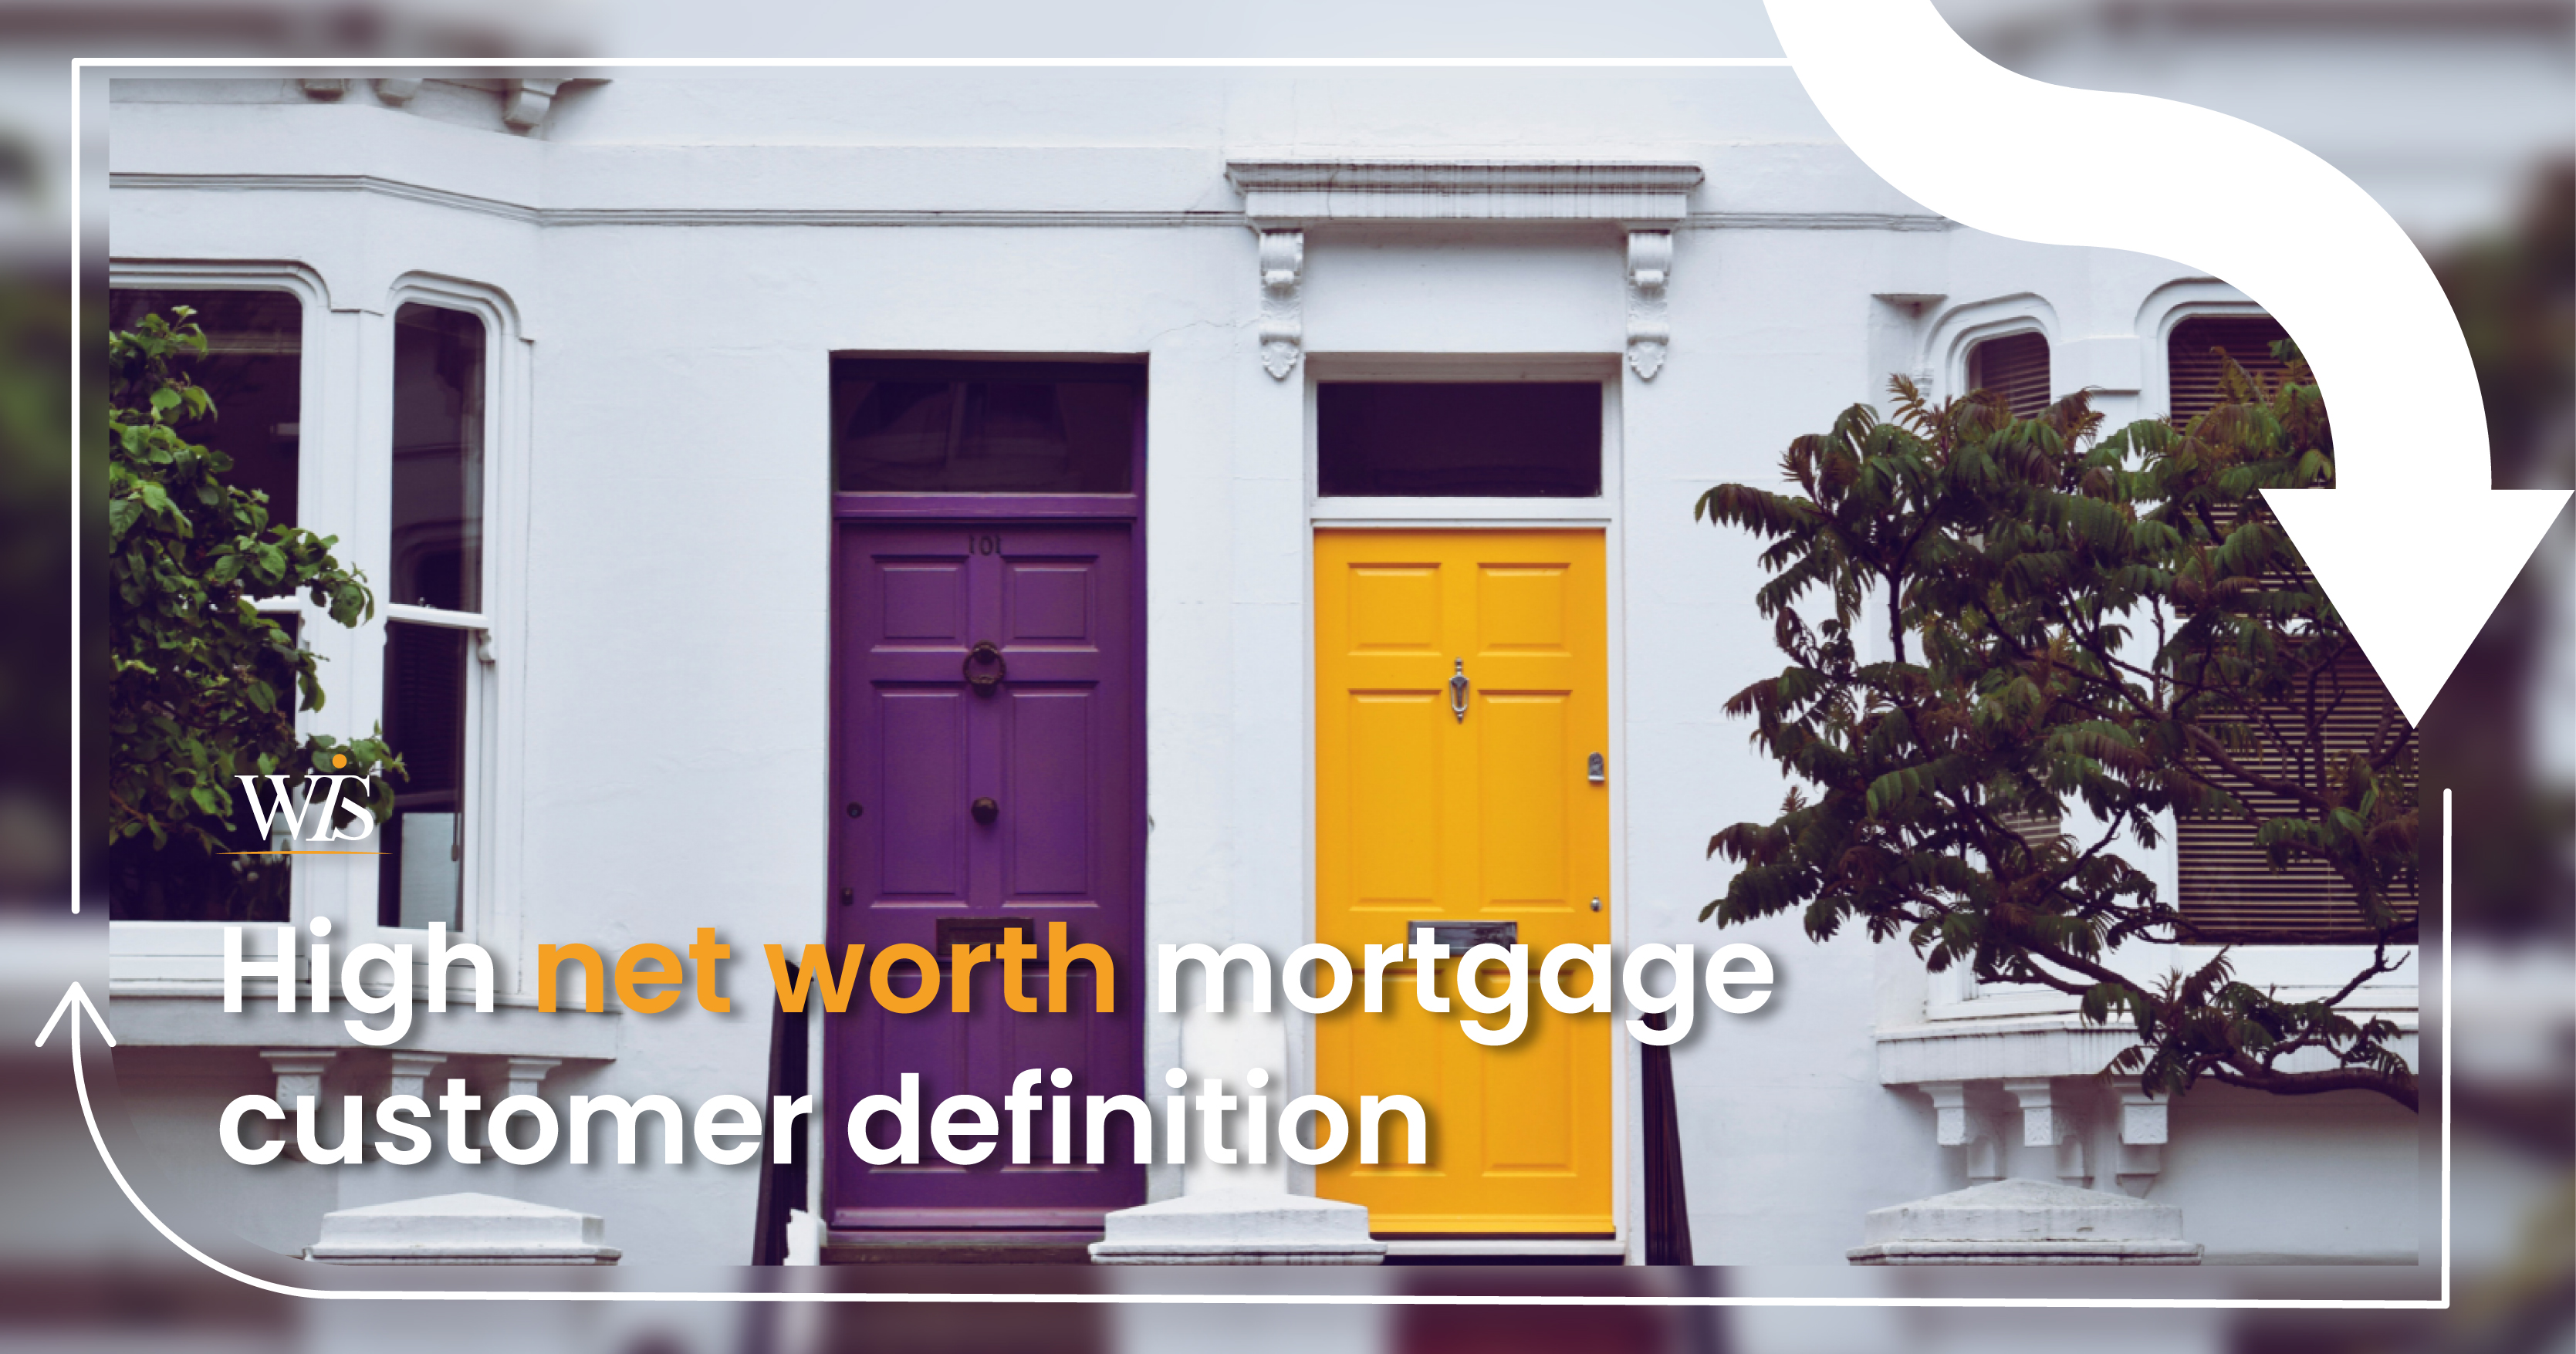 High net worth mortgage customer definition – Everything you need to know  image